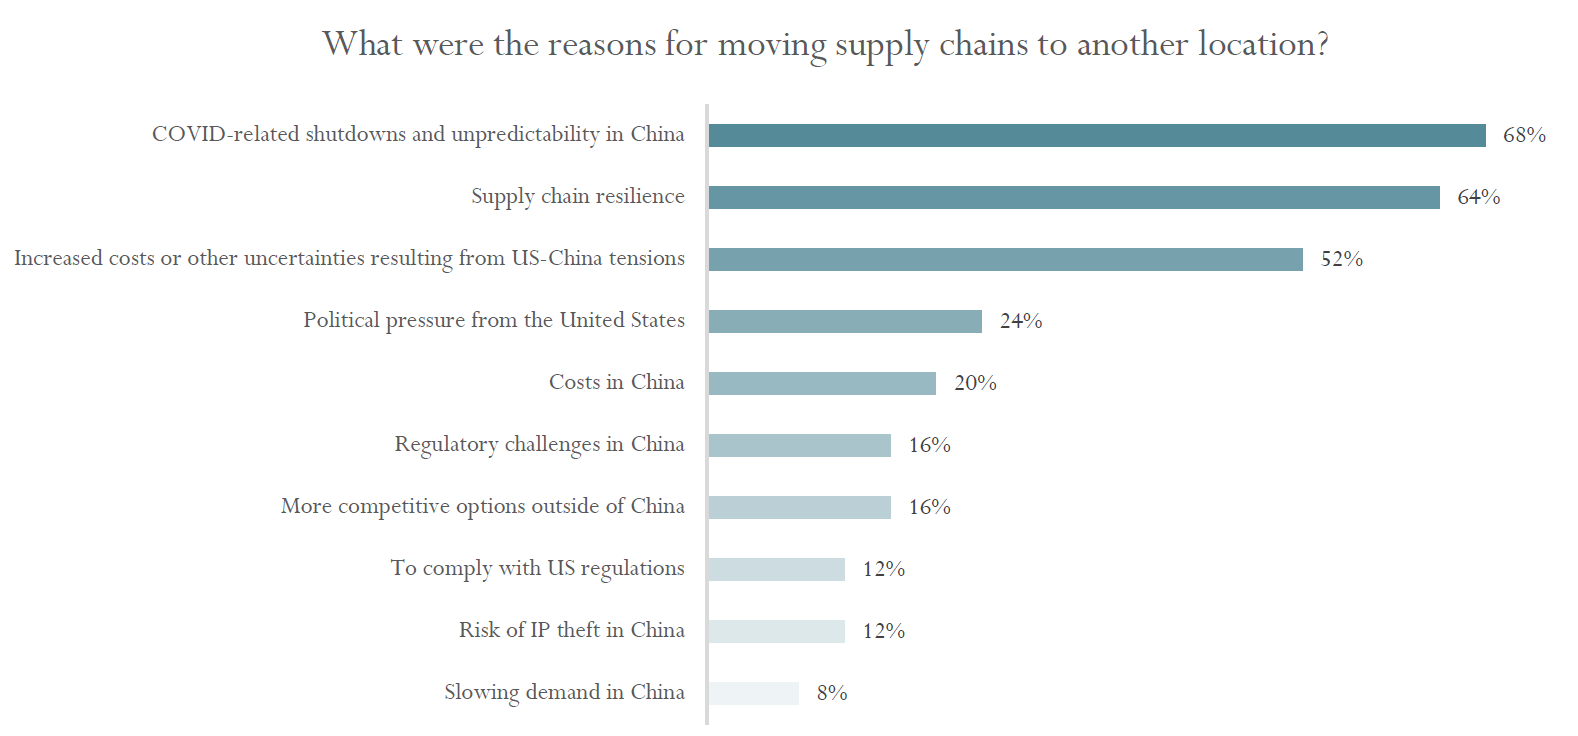 Source: US-China Business Council